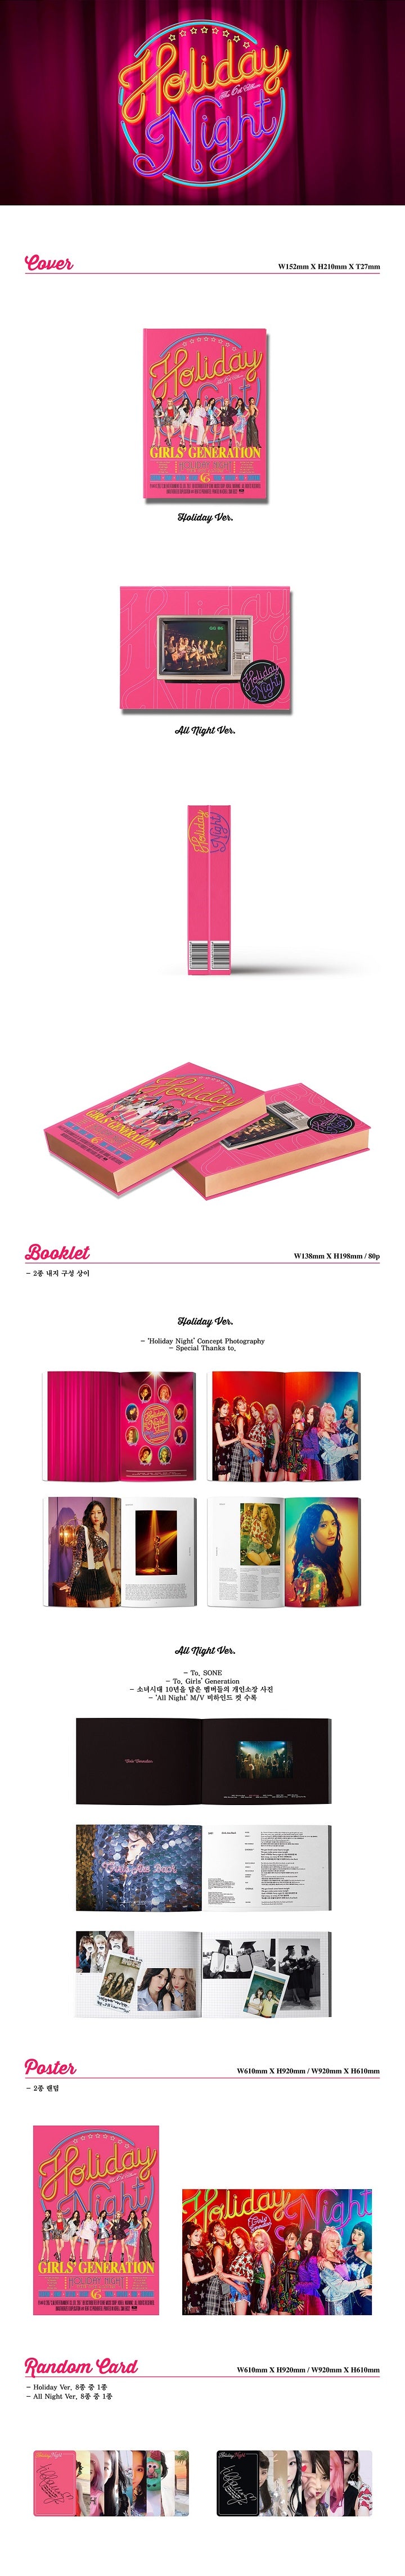 1 CD
1 Booklet (80 pages)
1 Photo Card